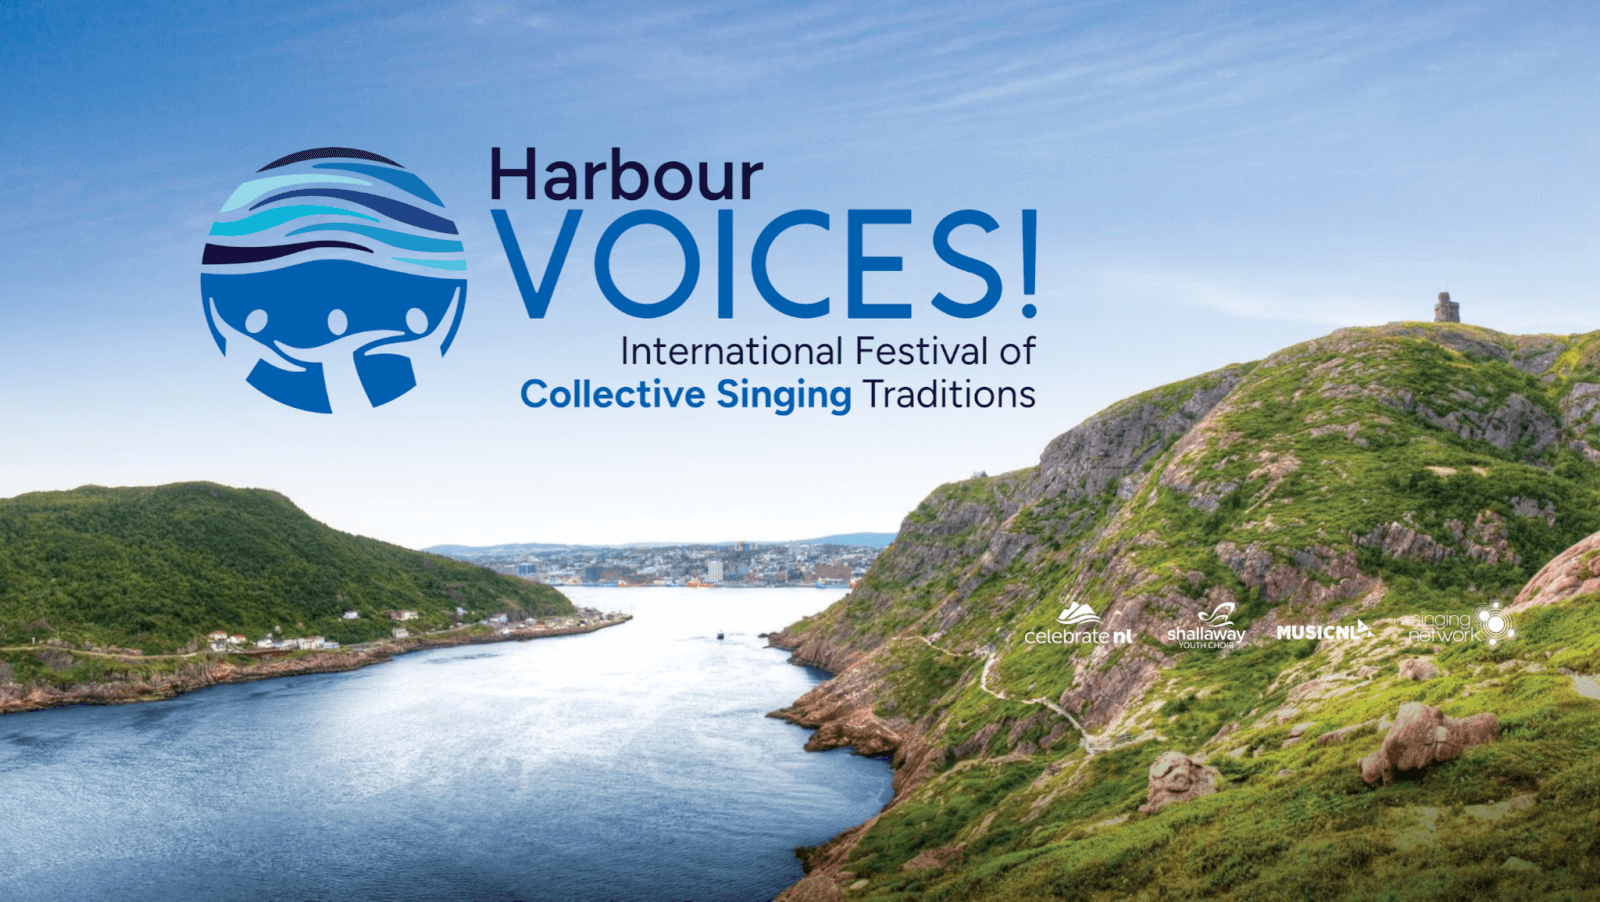 HarbourVOICES! International Festival of Collective Singing